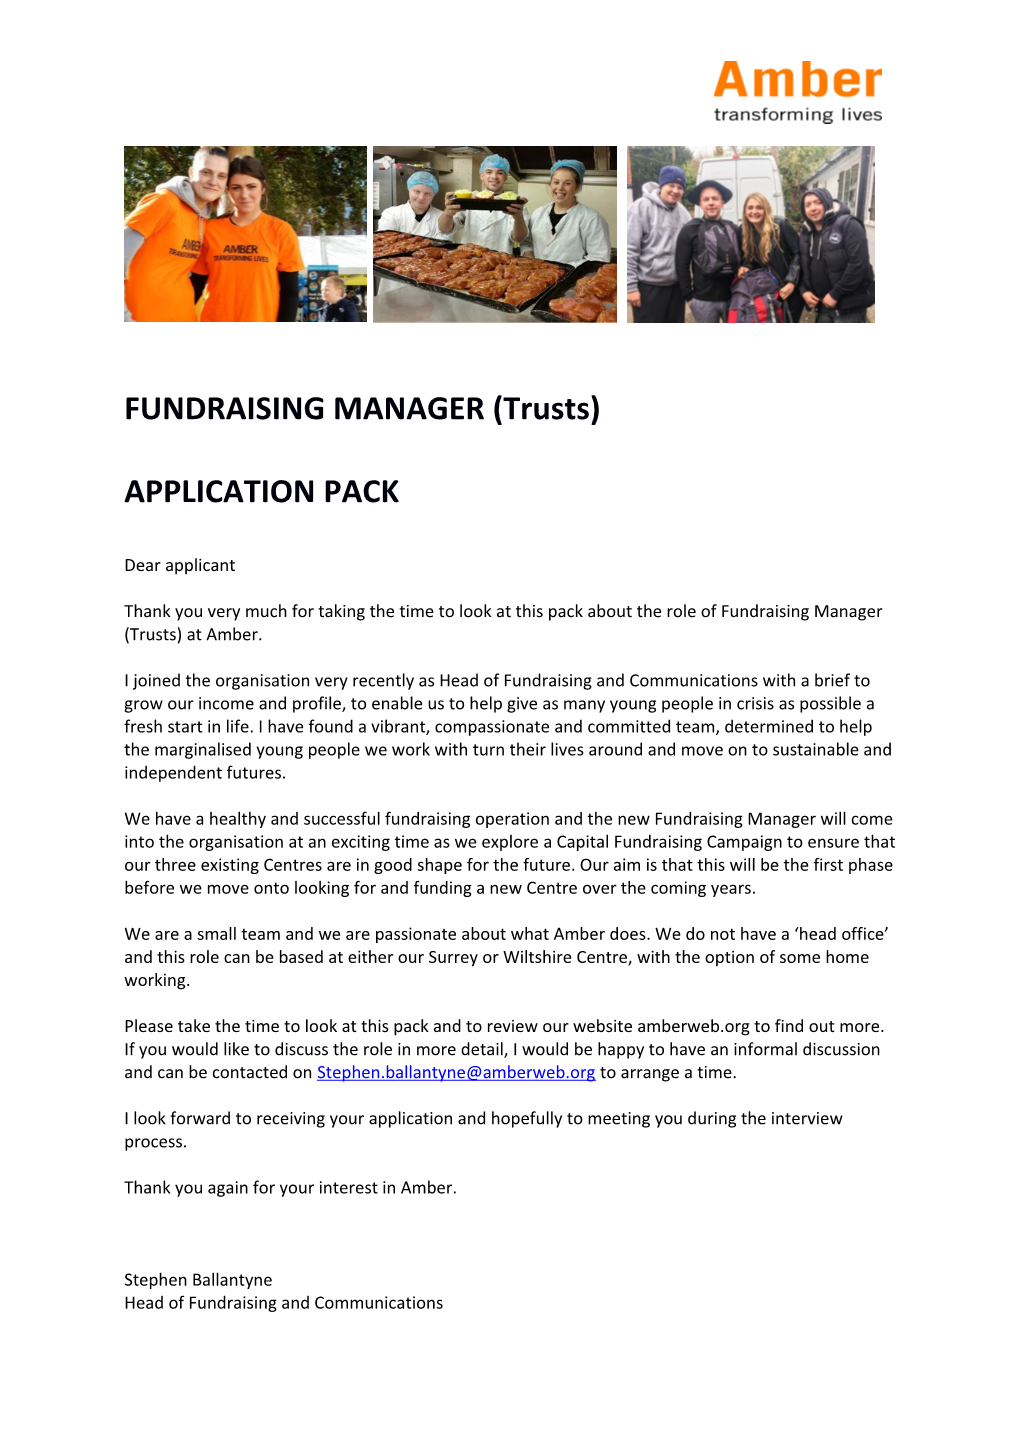 FUNDRAISING MANAGER (Trusts)